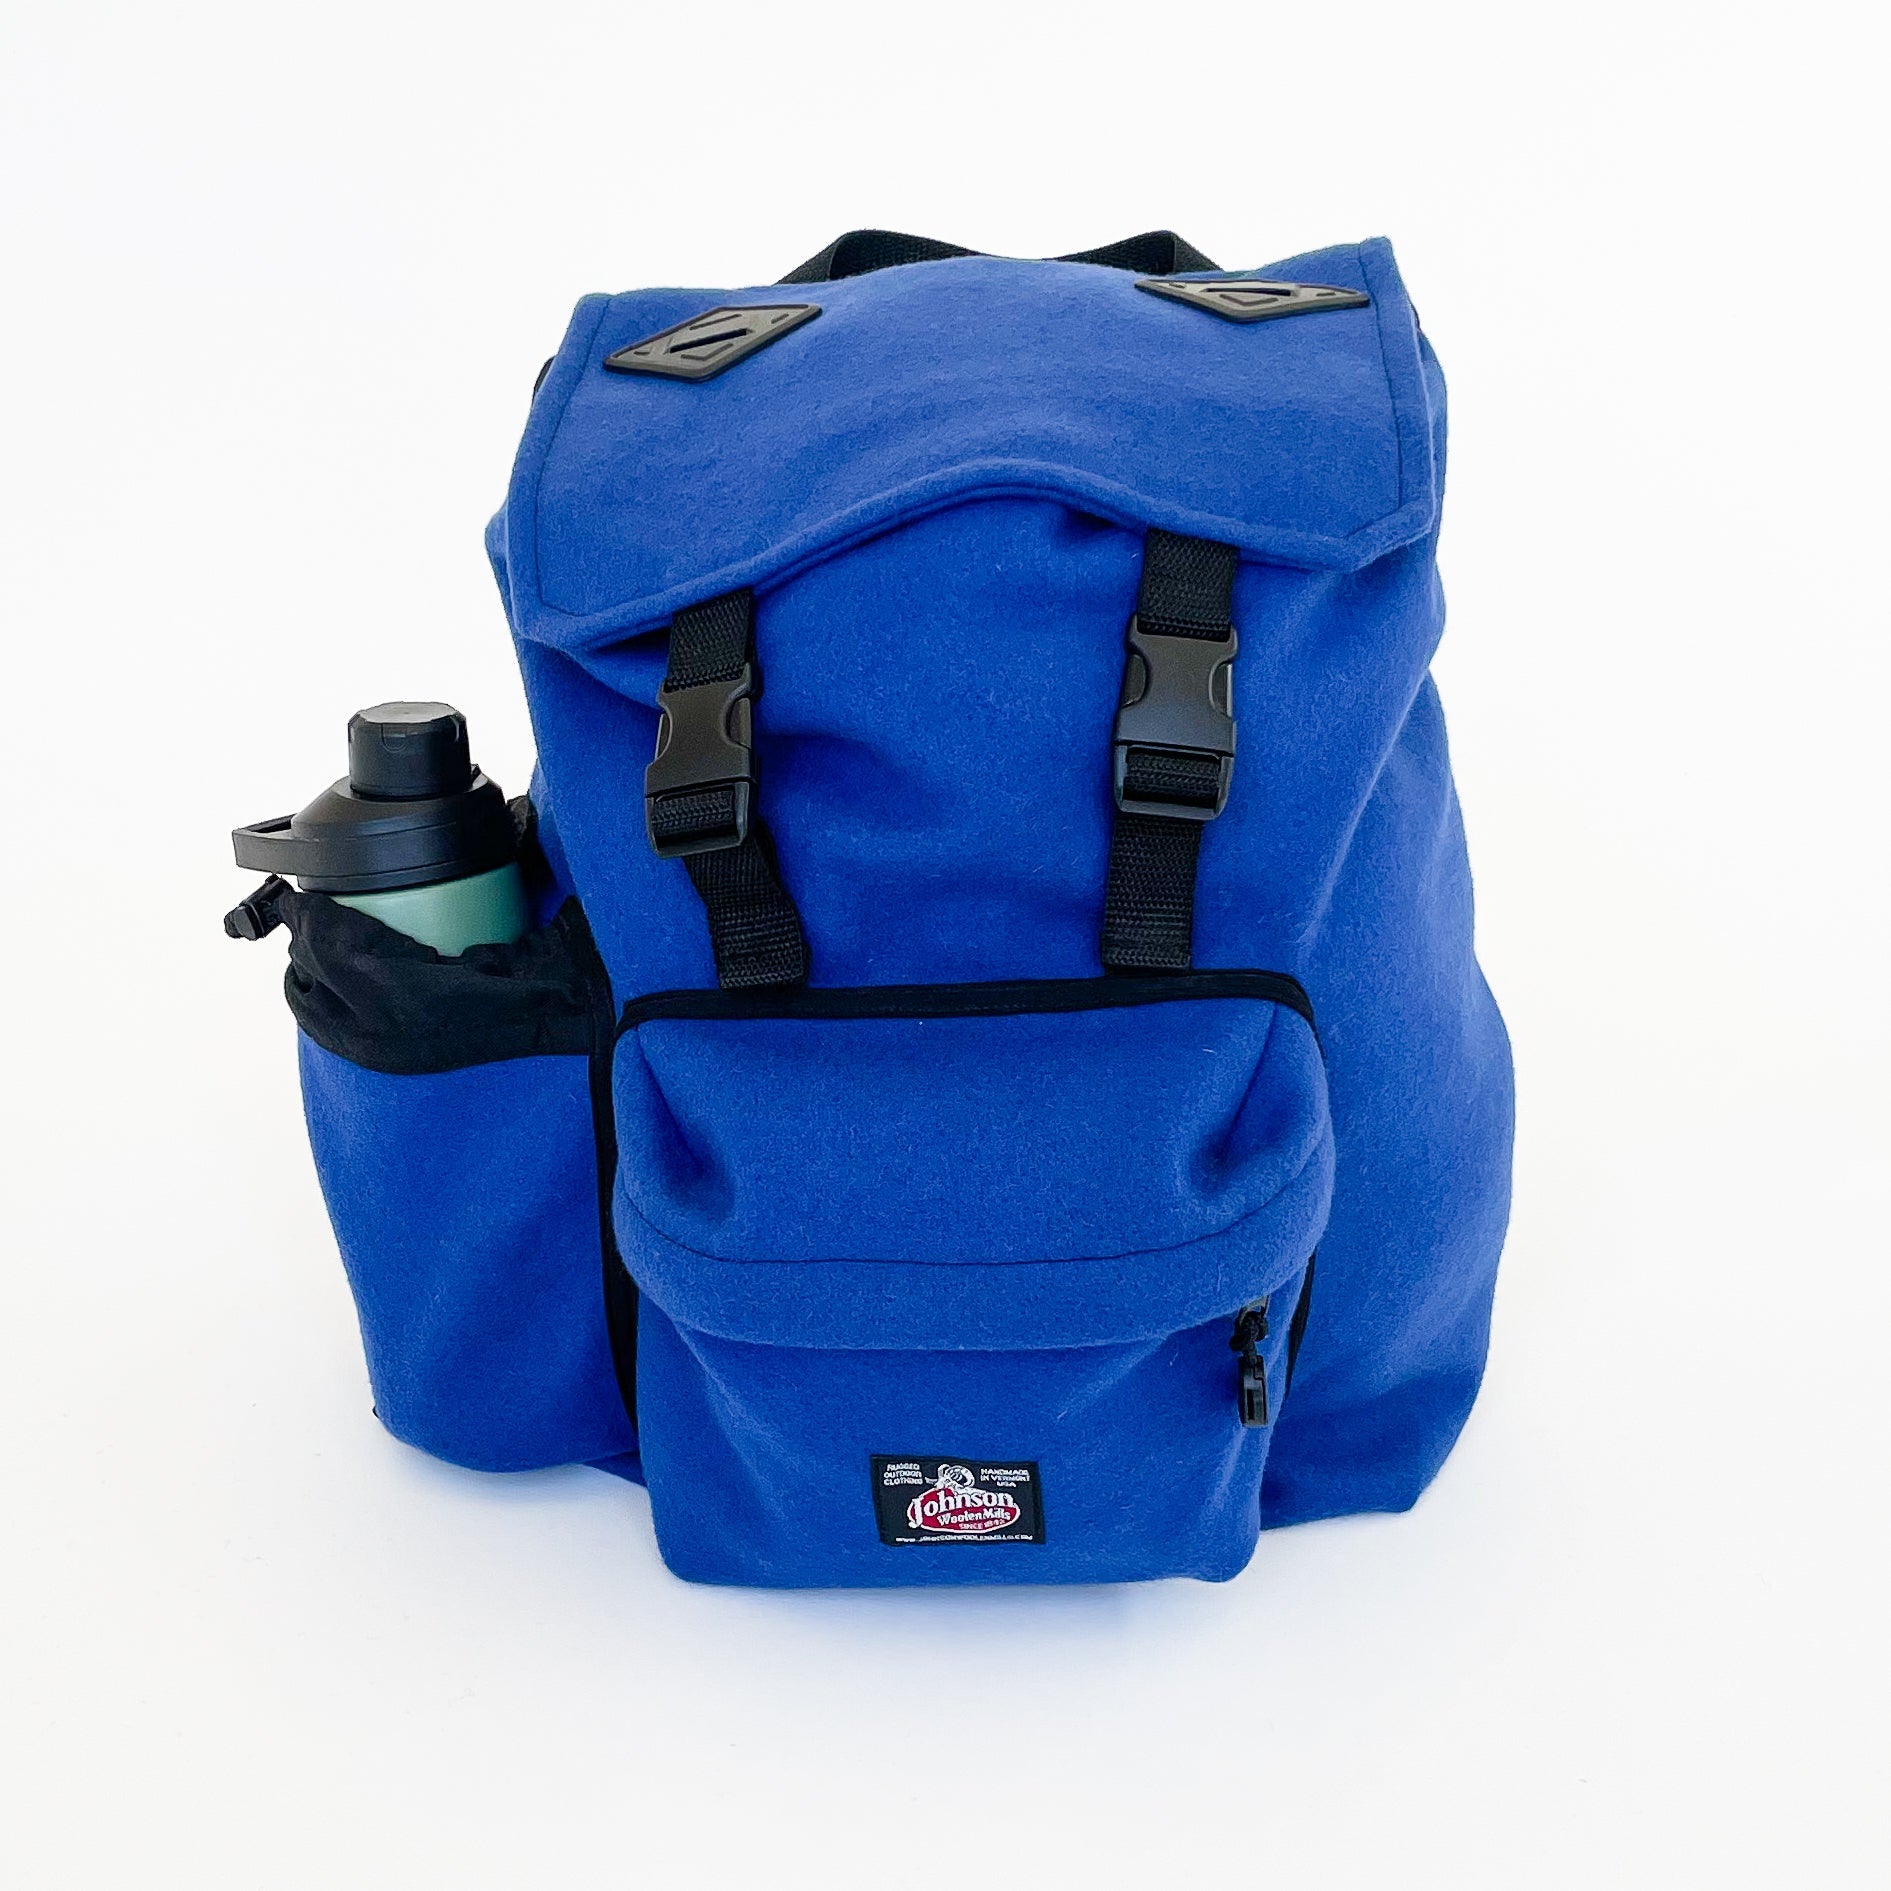 Johnson Woolen Mills Daypack Royal Blue front view with water bottle in side pocket